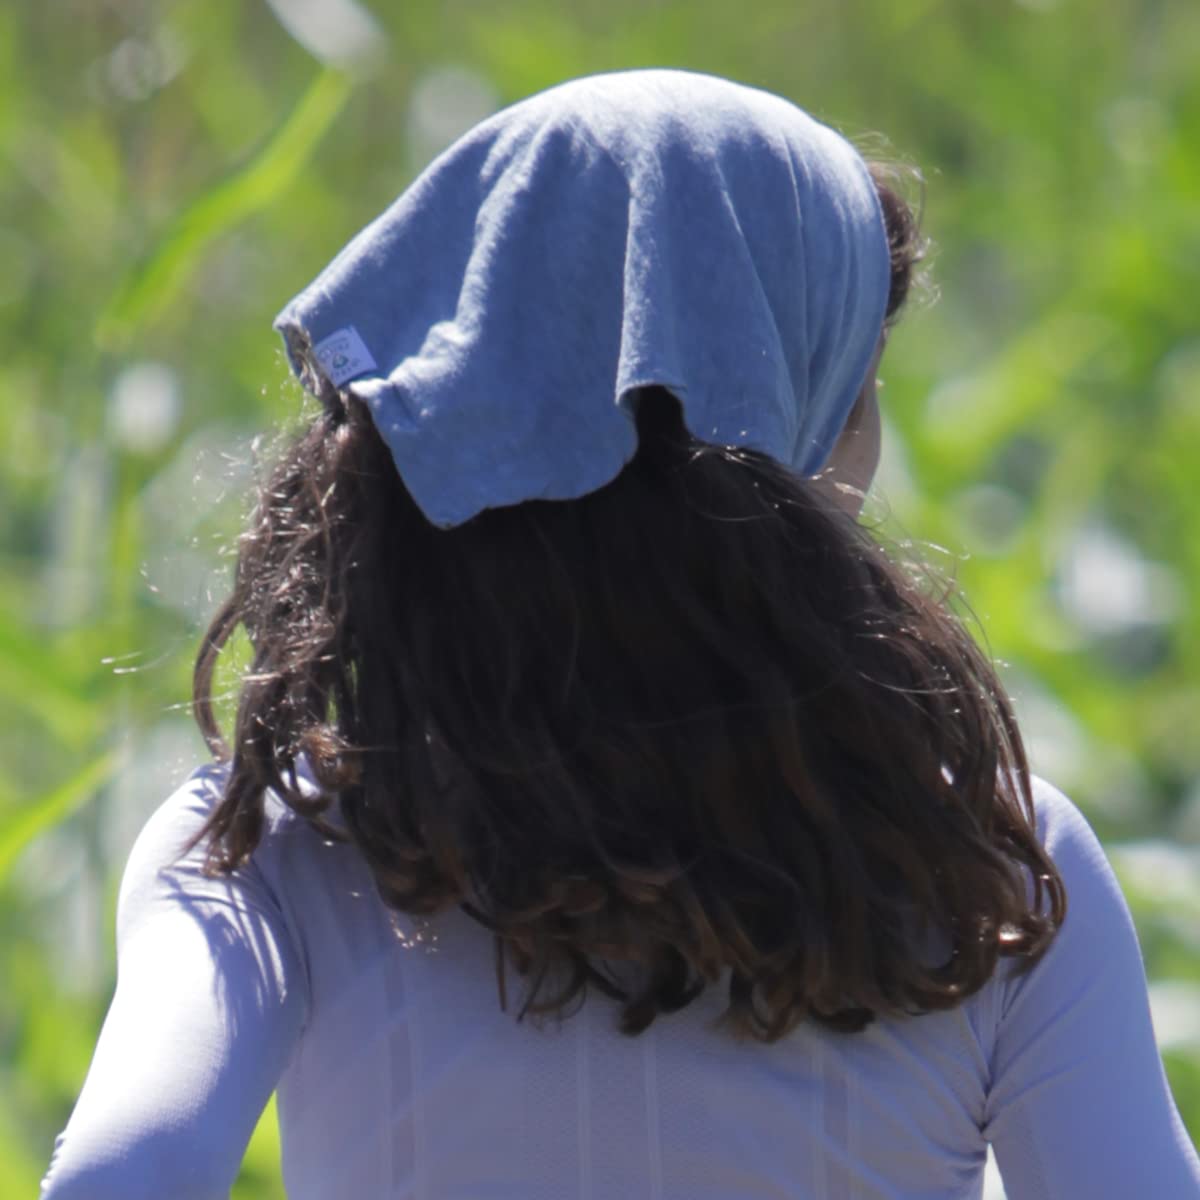 Pang Wangle Bug Repellent Bandana with Odorless Insect Shield® Technology, Eco-Friendly Recycled Cotton Made in The USA, Perfect for Gardening, Hiking, or Just Enjoying The Outdoors (Faded Denim)